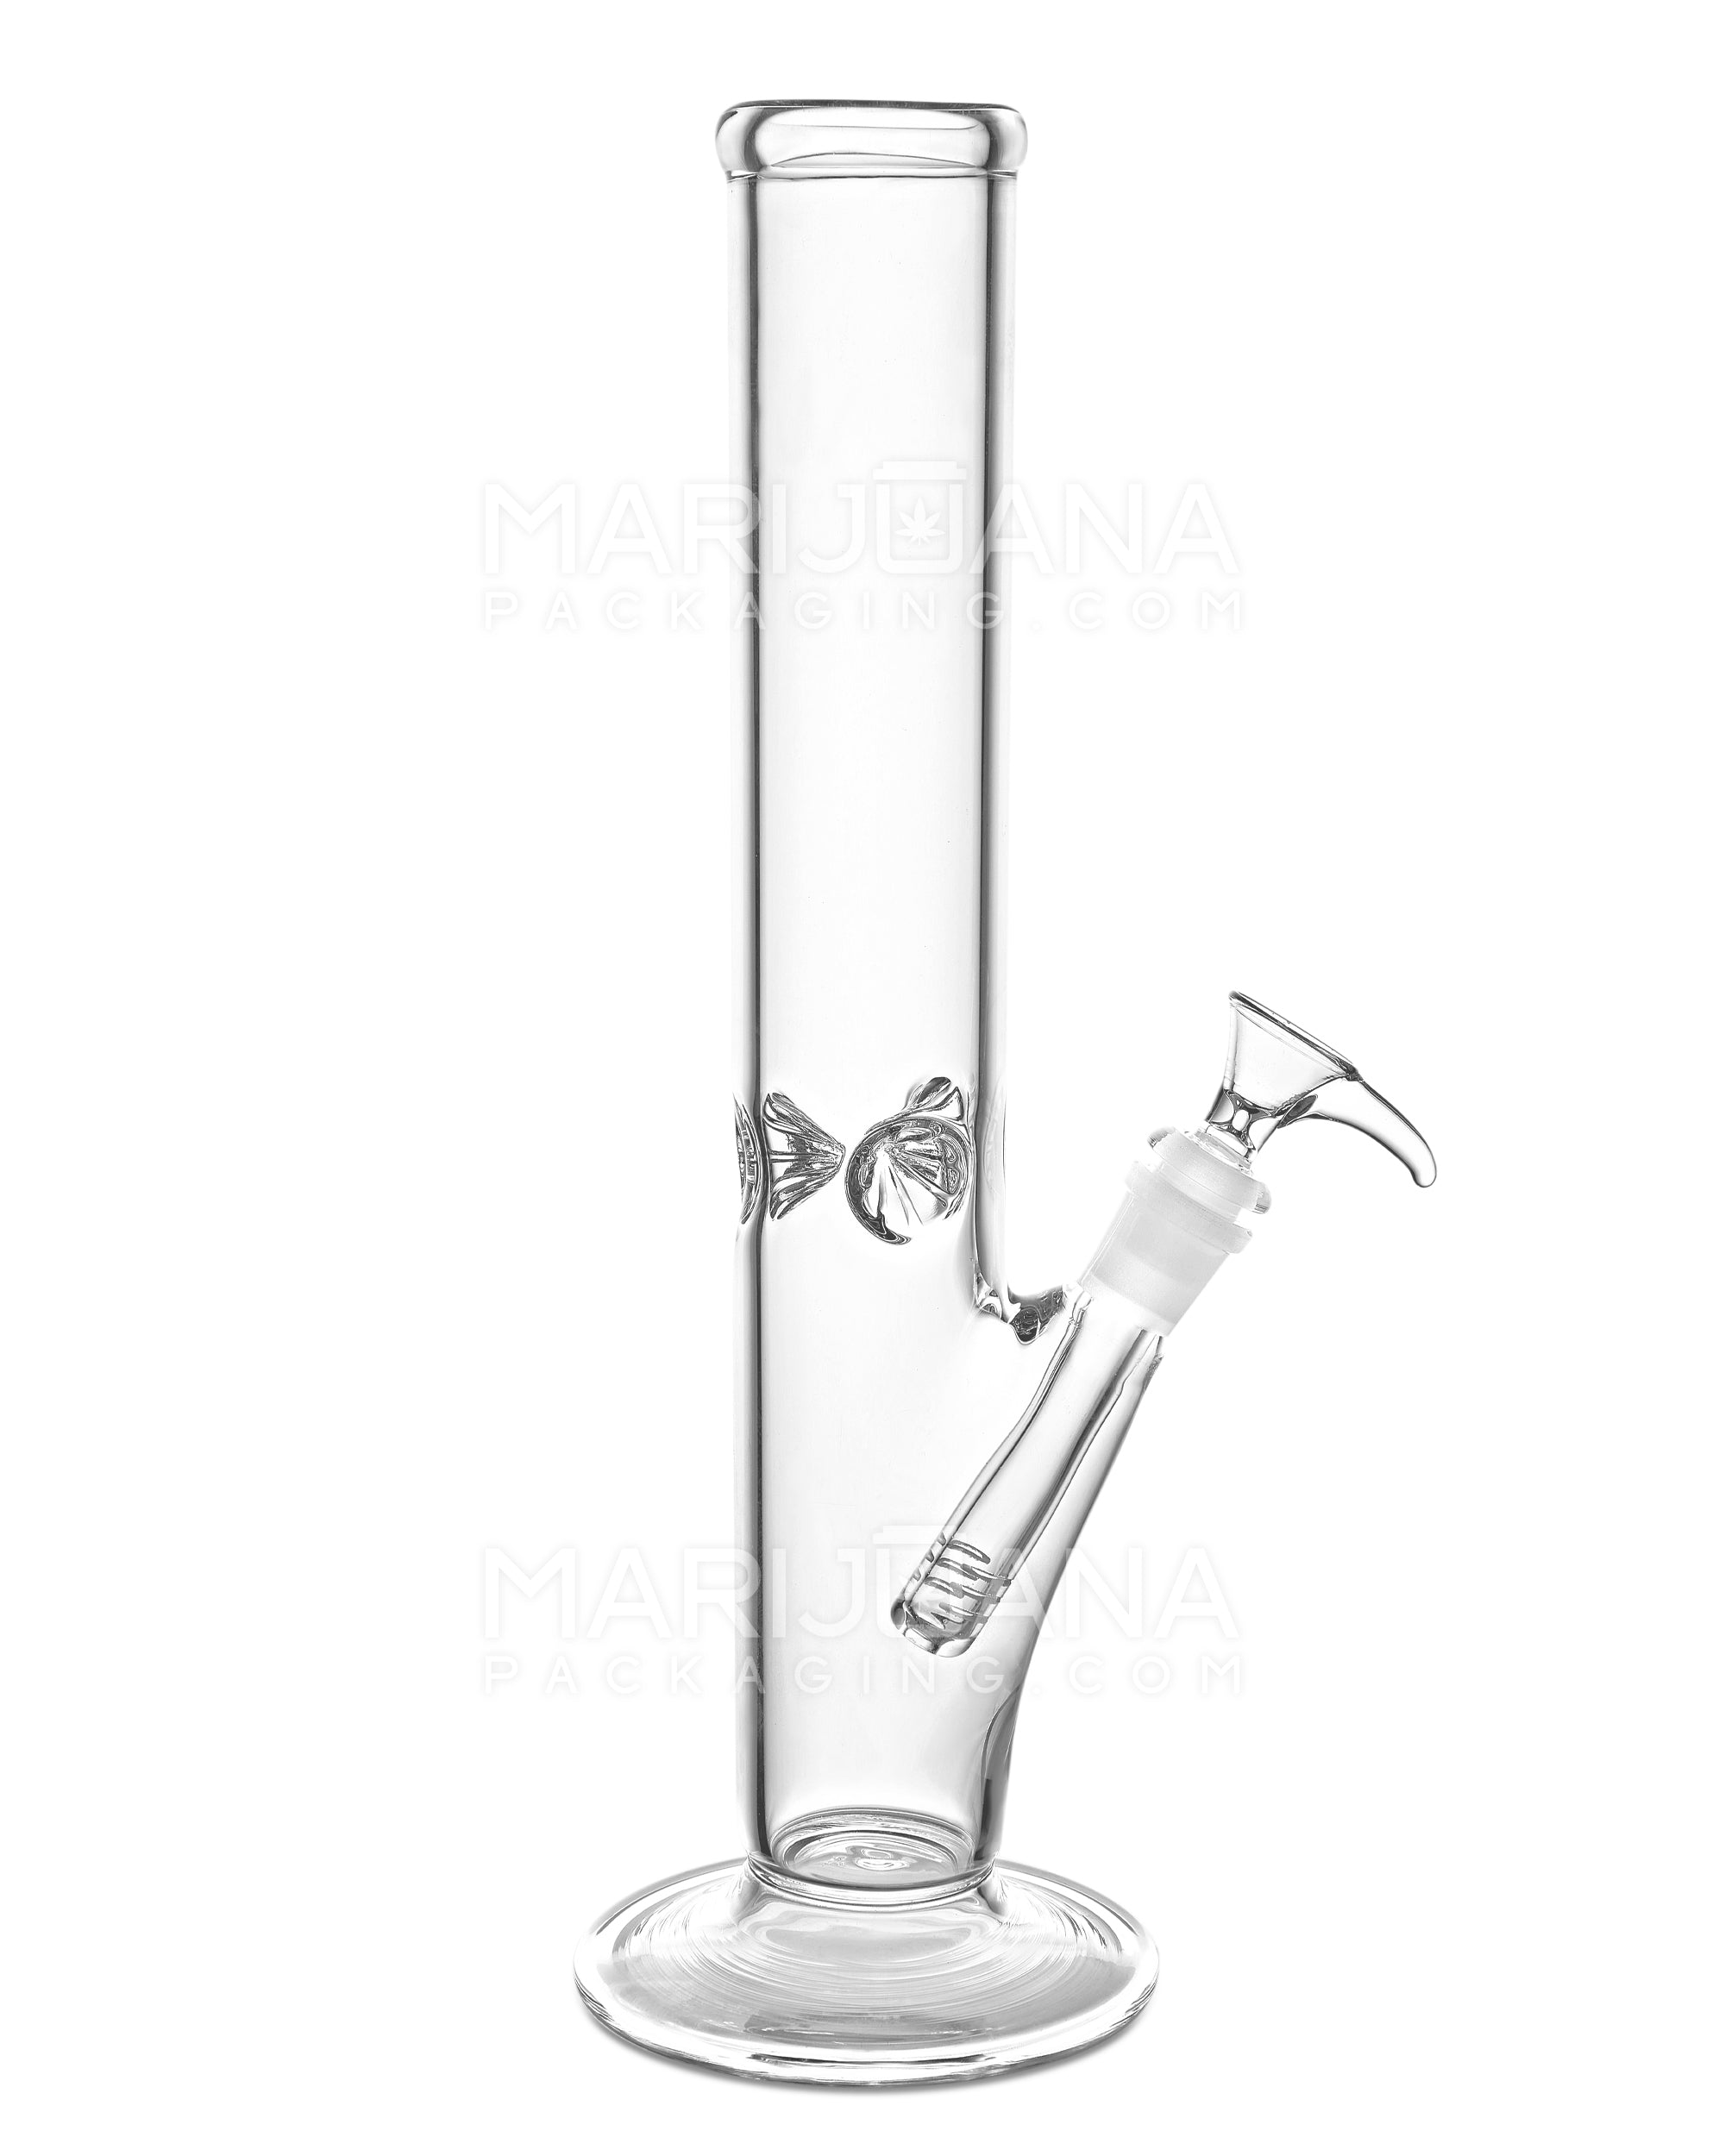 Straight Neck Clear 12 Inch Ice Catcher USA Glass Bong